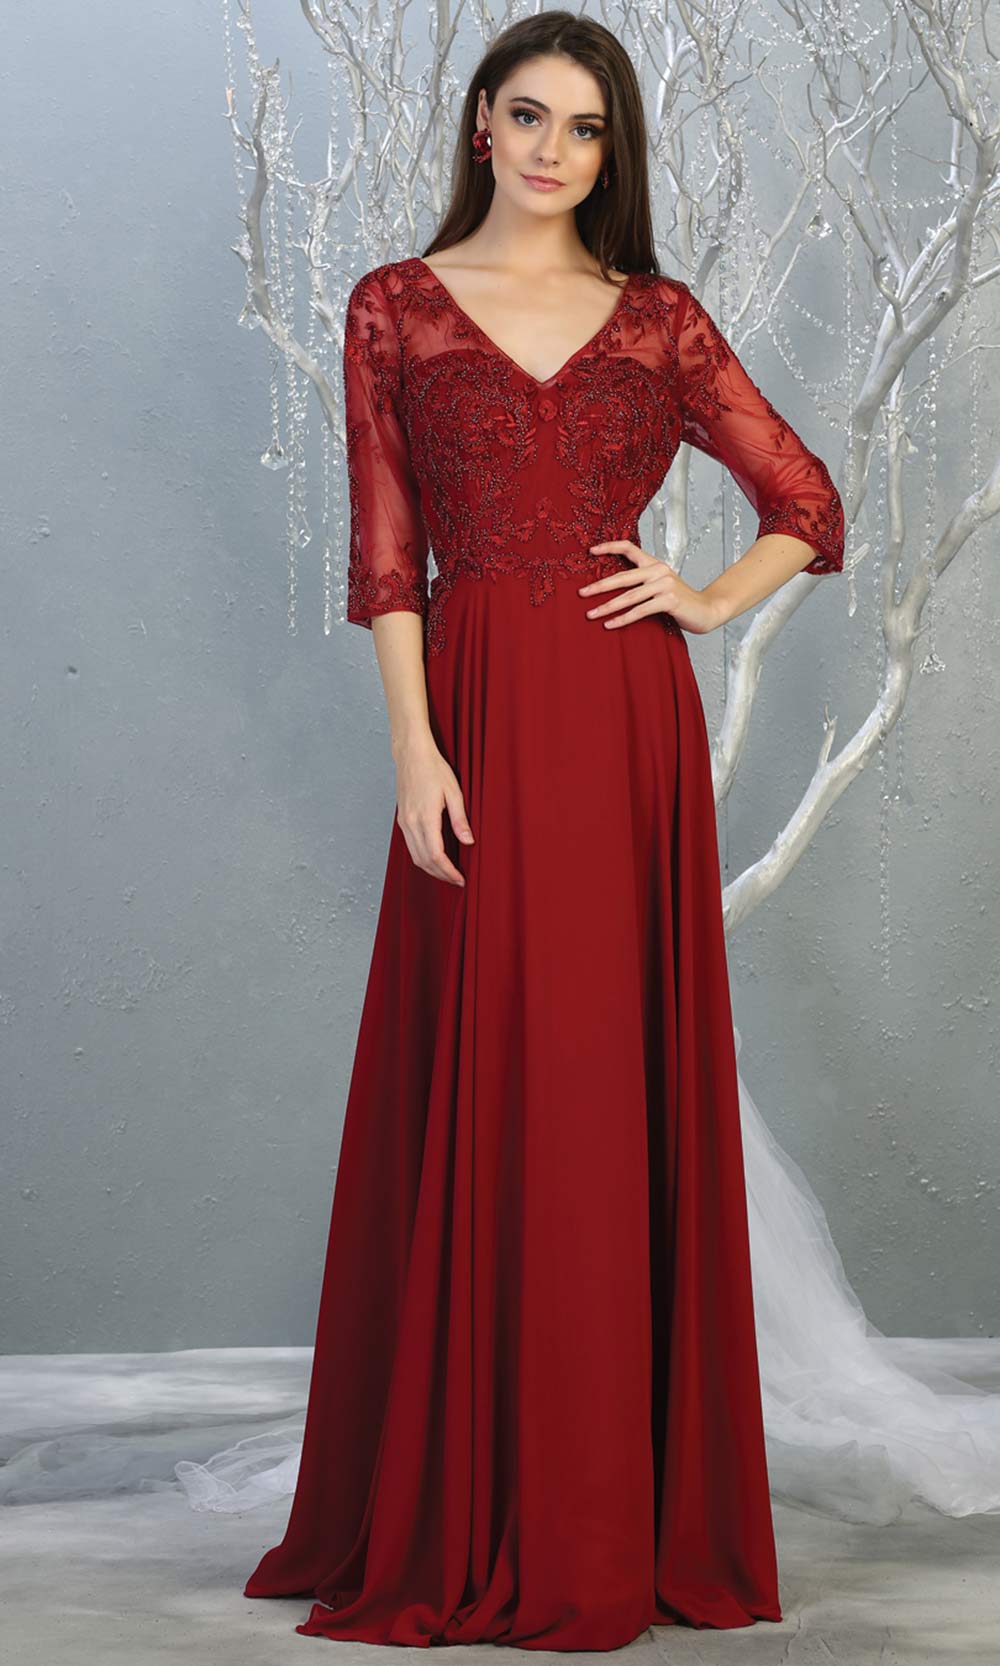 Mayqueen RQ7820 long burgundy red modest flowy dress w/ long sleeves. Dark red chiffon & lace top is perfect for  mother of the bride, formal wedding guest, indowestern gown, evening party dress, dark red muslim party dress. Plus sizes avail.jpg